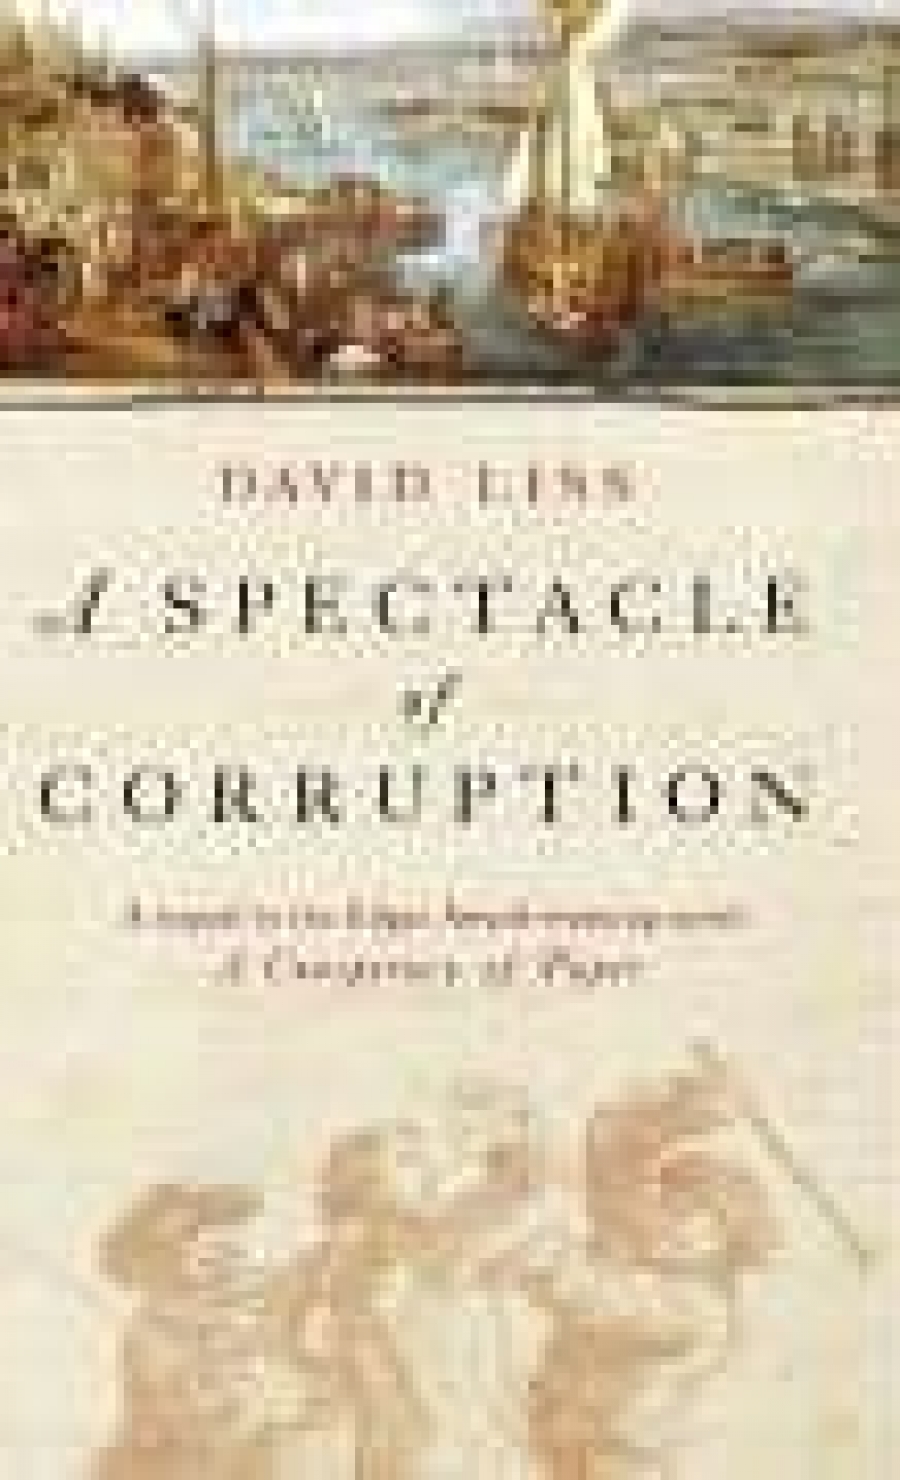 David L. A Spectacle of Corruption 